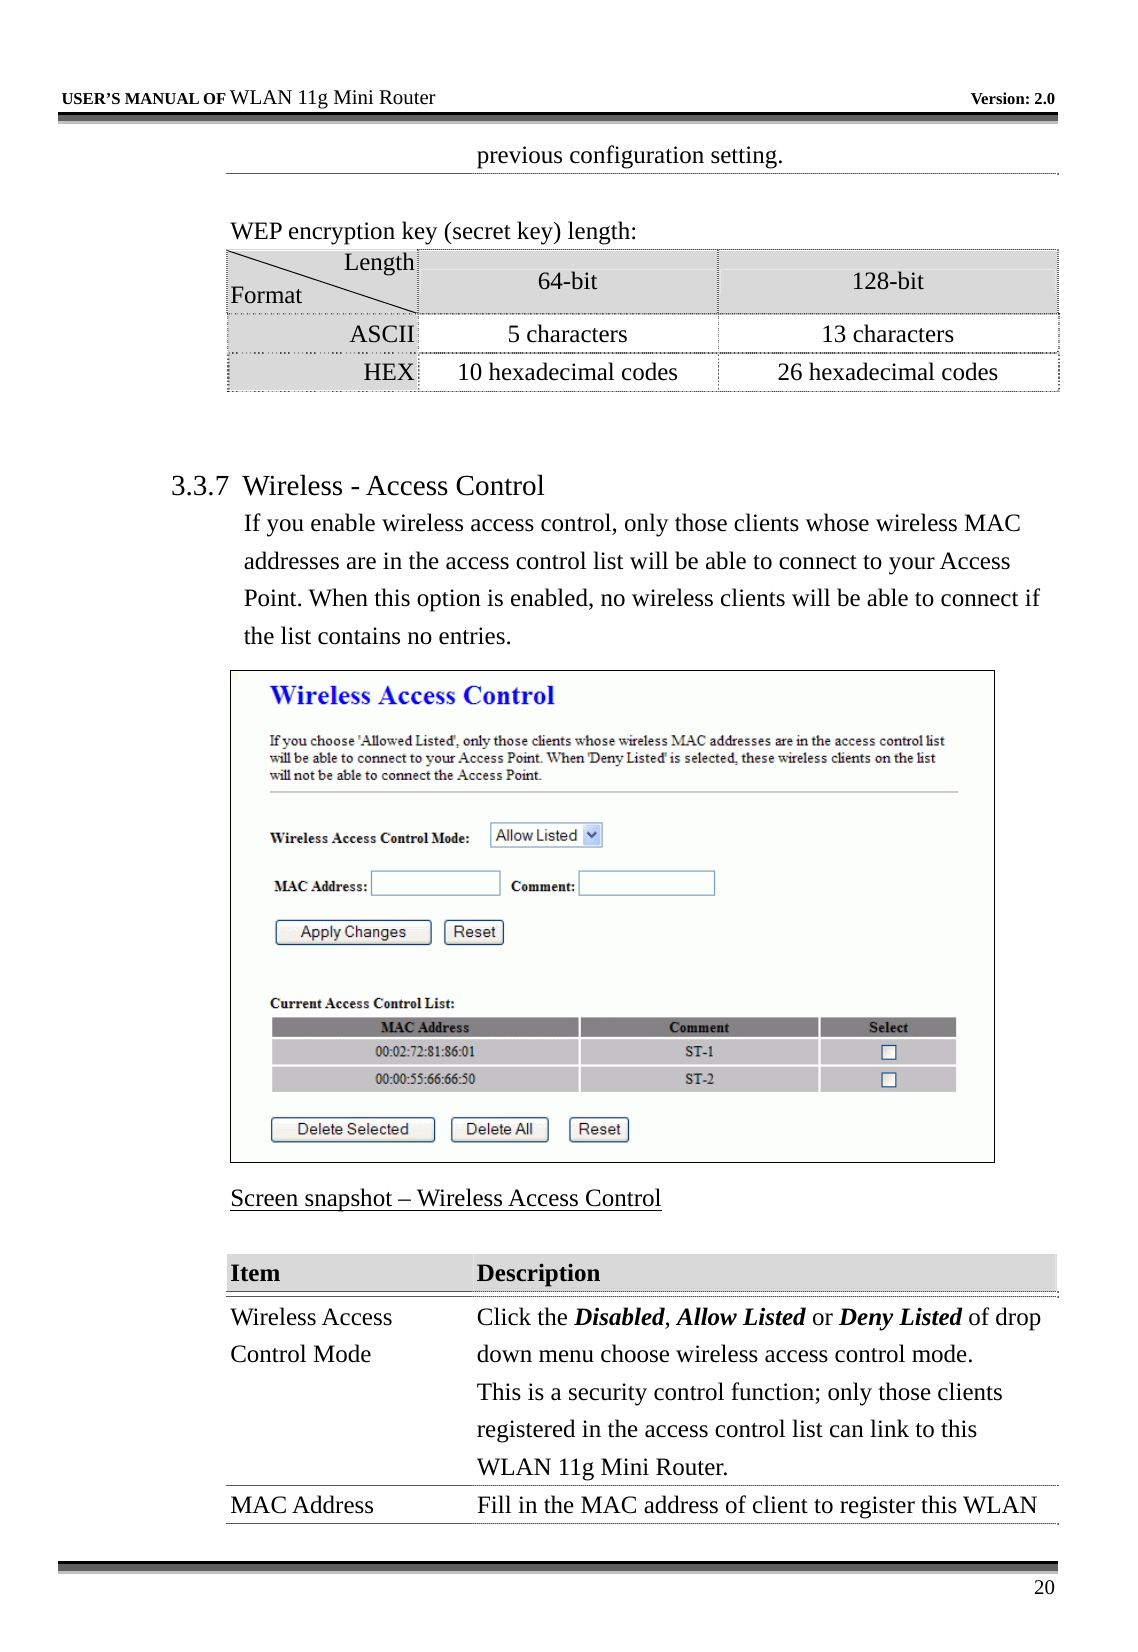   USER’S MANUAL OF WLAN 11g Mini Router   Version: 2.0     20 previous configuration setting.  WEP encryption key (secret key) length: Length Format  64-bit  128-bit ASCII  5 characters  13 characters HEX  10 hexadecimal codes    26 hexadecimal codes   3.3.7  Wireless - Access Control If you enable wireless access control, only those clients whose wireless MAC addresses are in the access control list will be able to connect to your Access Point. When this option is enabled, no wireless clients will be able to connect if the list contains no entries.  Screen snapshot – Wireless Access Control  Item  Description   Wireless Access Control Mode Click the Disabled, Allow Listed or Deny Listed of drop down menu choose wireless access control mode. This is a security control function; only those clients registered in the access control list can link to this WLAN 11g Mini Router.   MAC Address  Fill in the MAC address of client to register this WLAN 